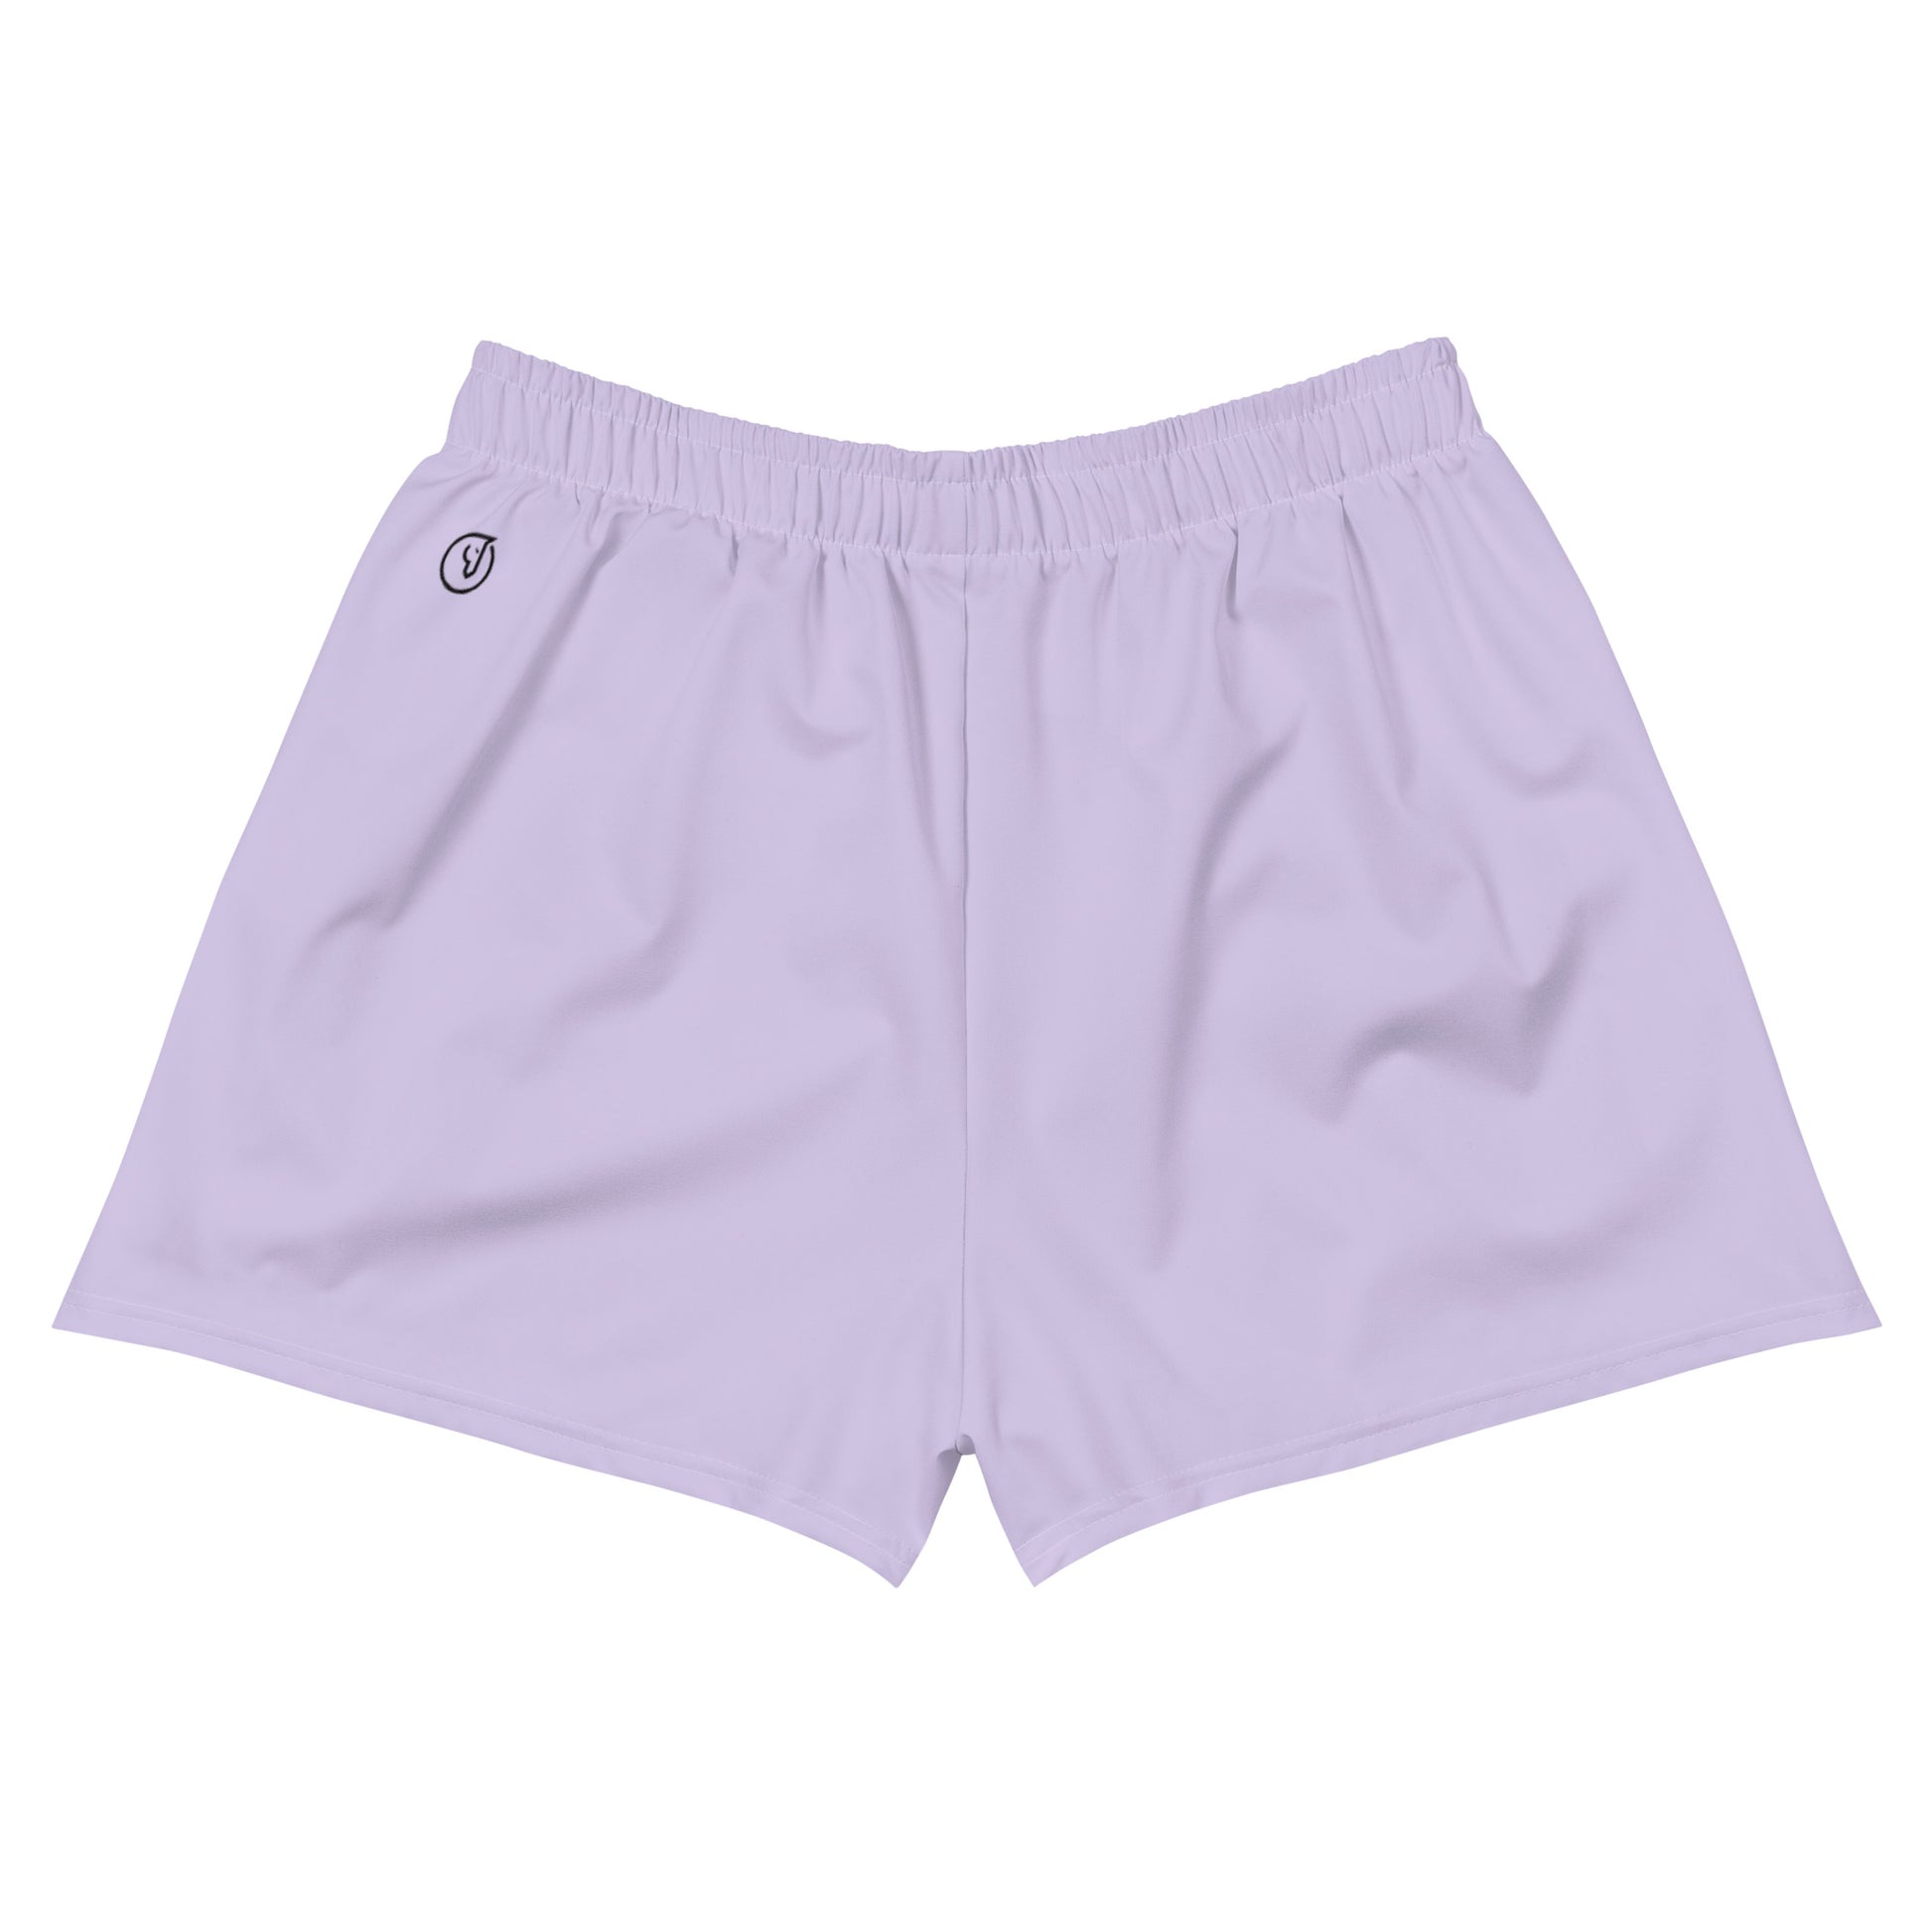 Humble Sportswear, women’s color match shorts, athletic shorts